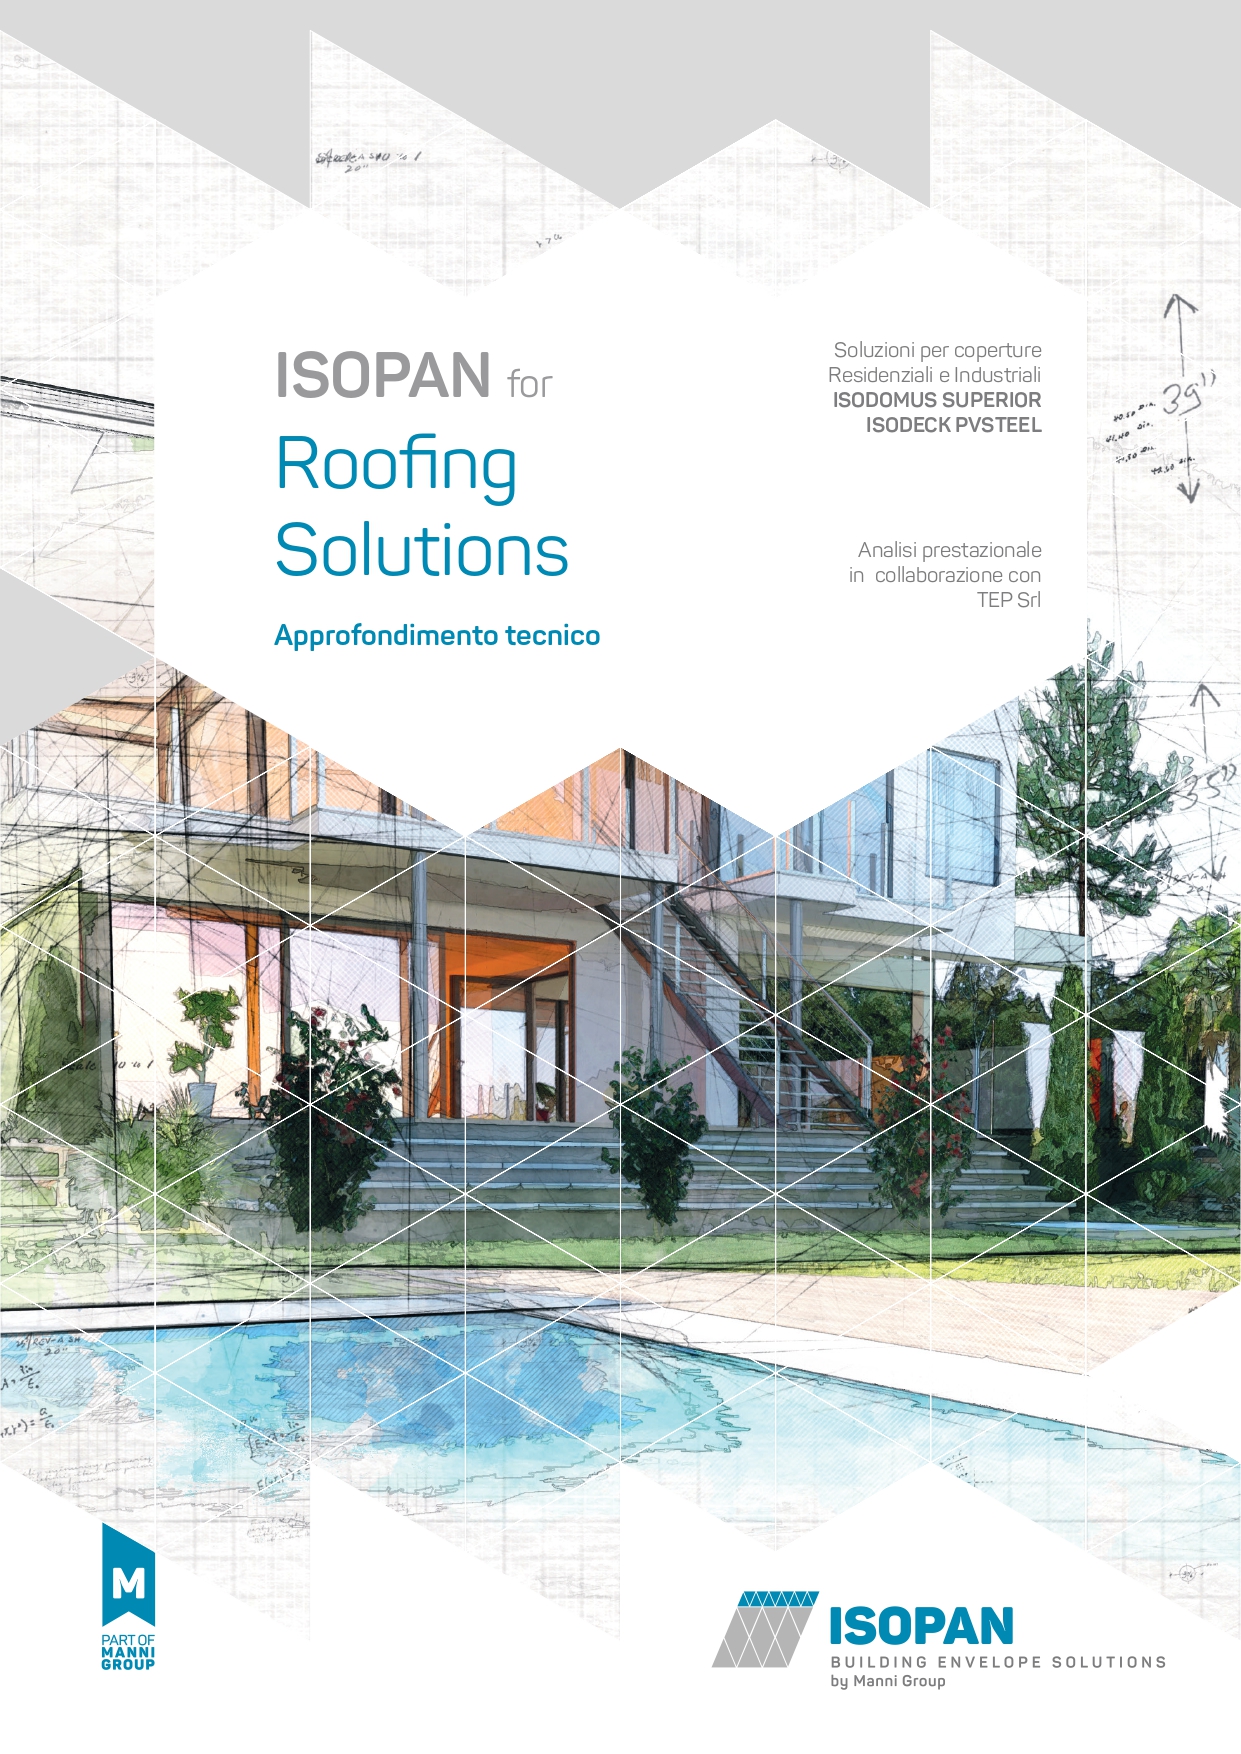 ISOPAN for ROOFING SOLUTIONS_TEP ANALYSIS_Rev02_pages-to-jpg-0001